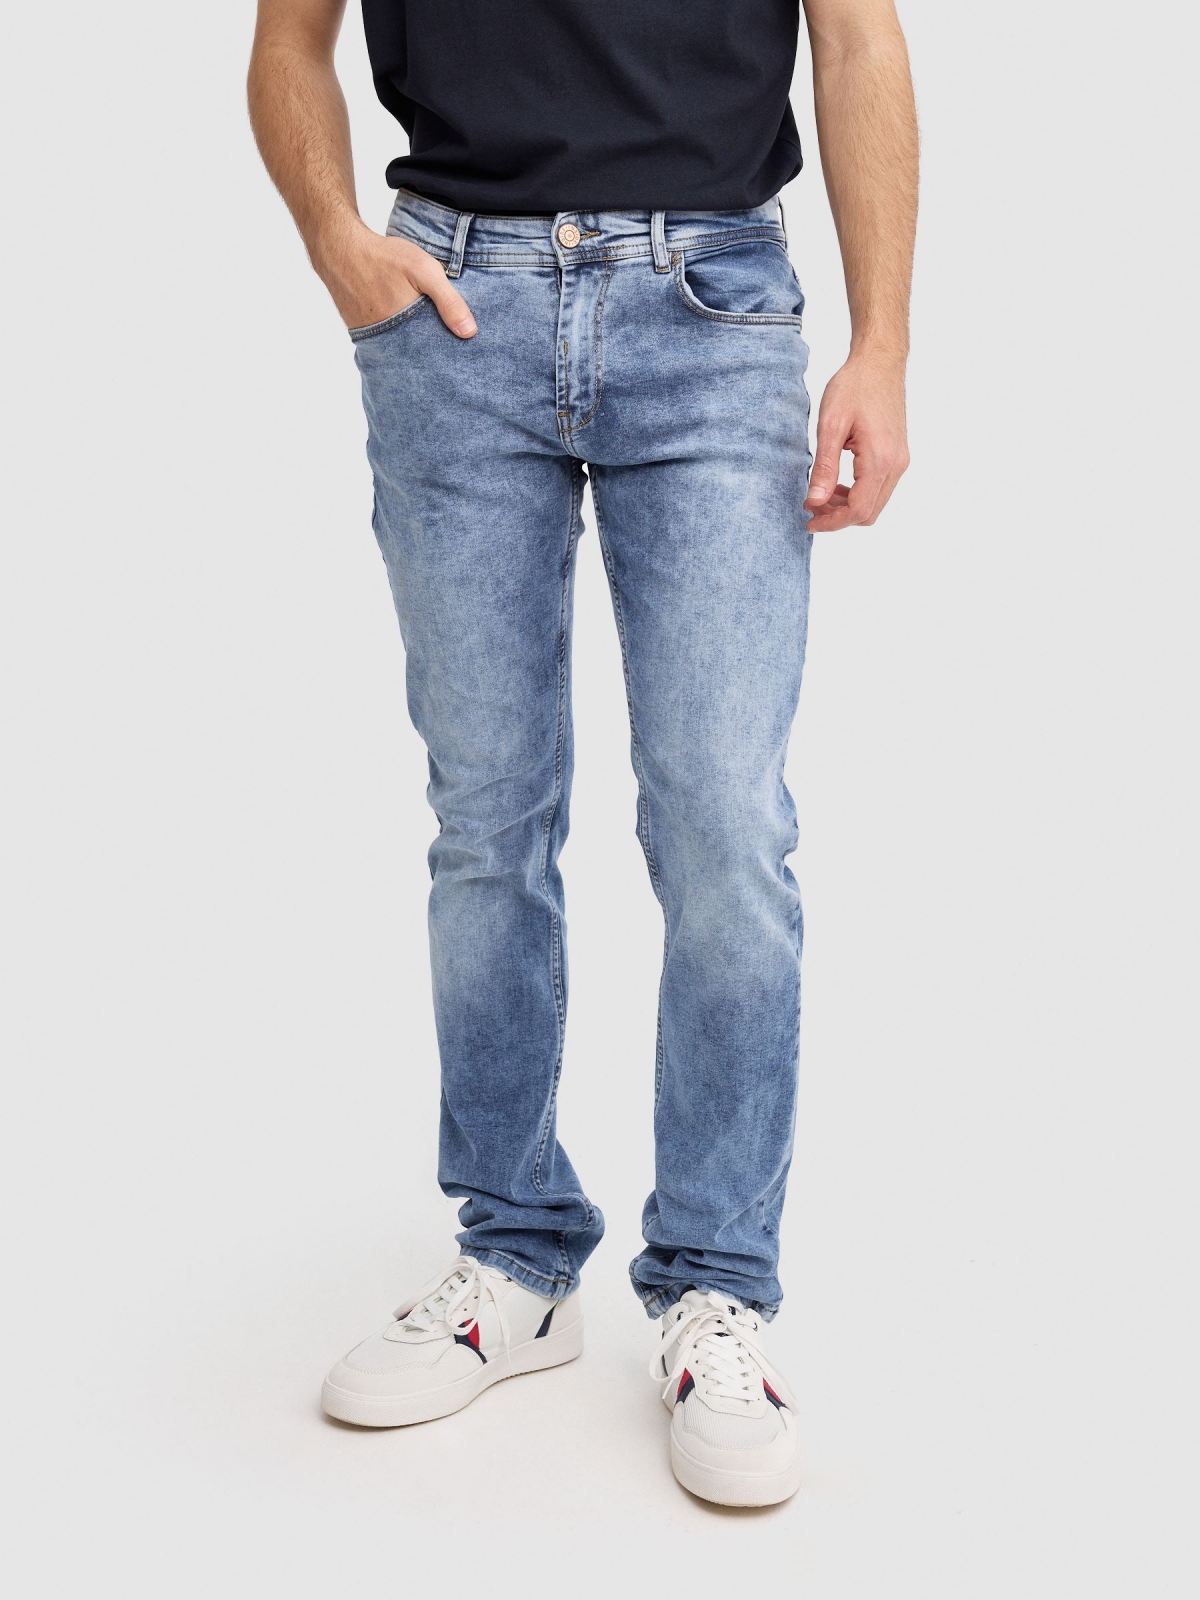 Regular wash jeans blue middle front view